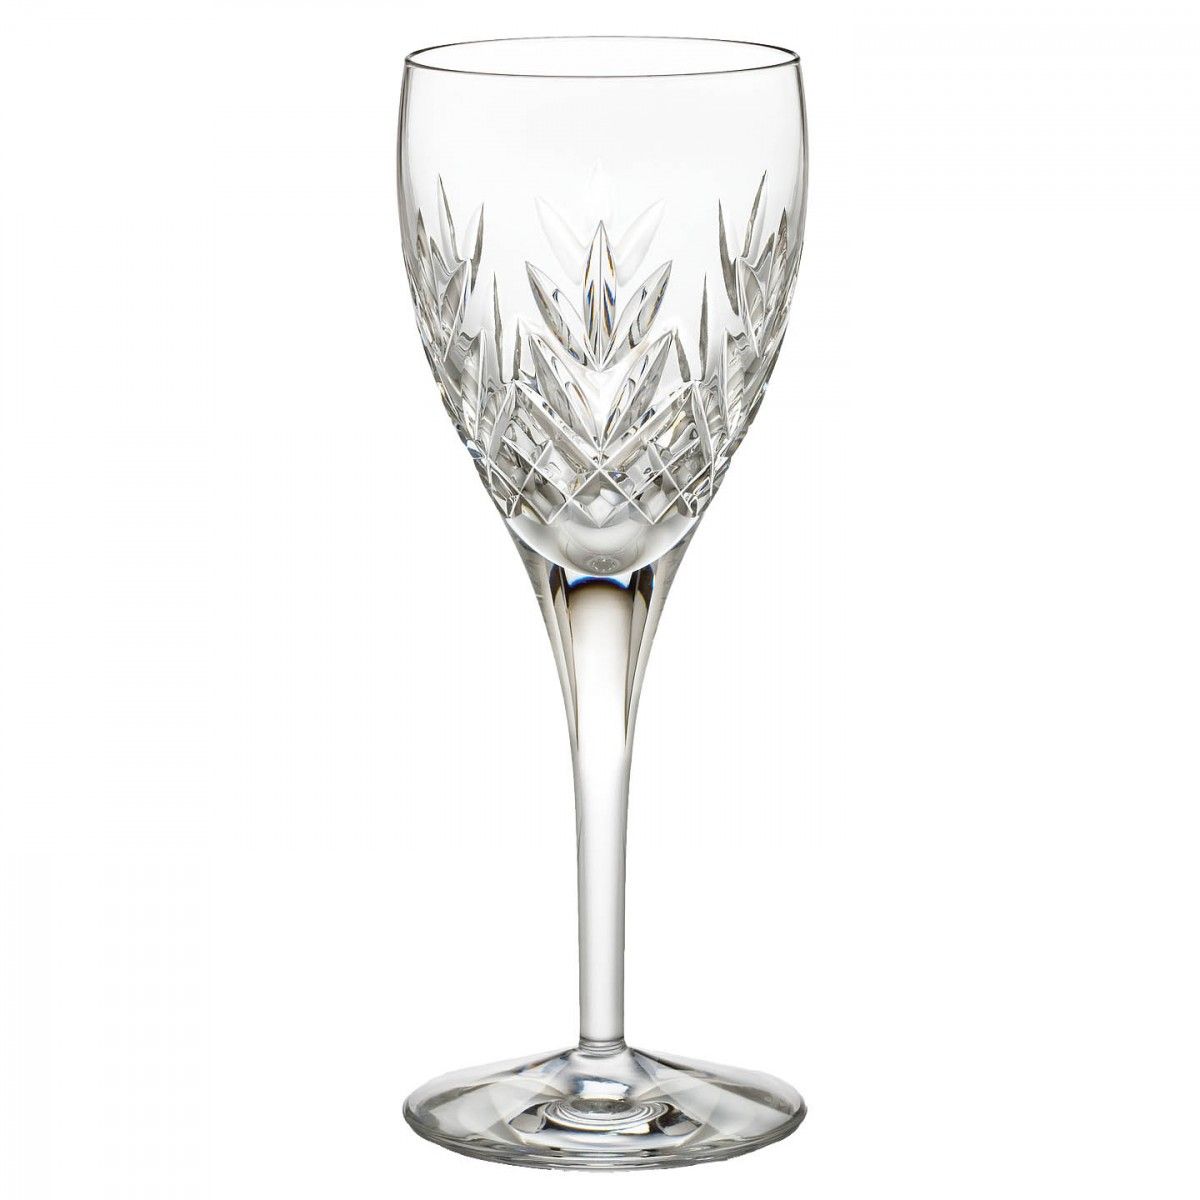 Cardiffe Goblet